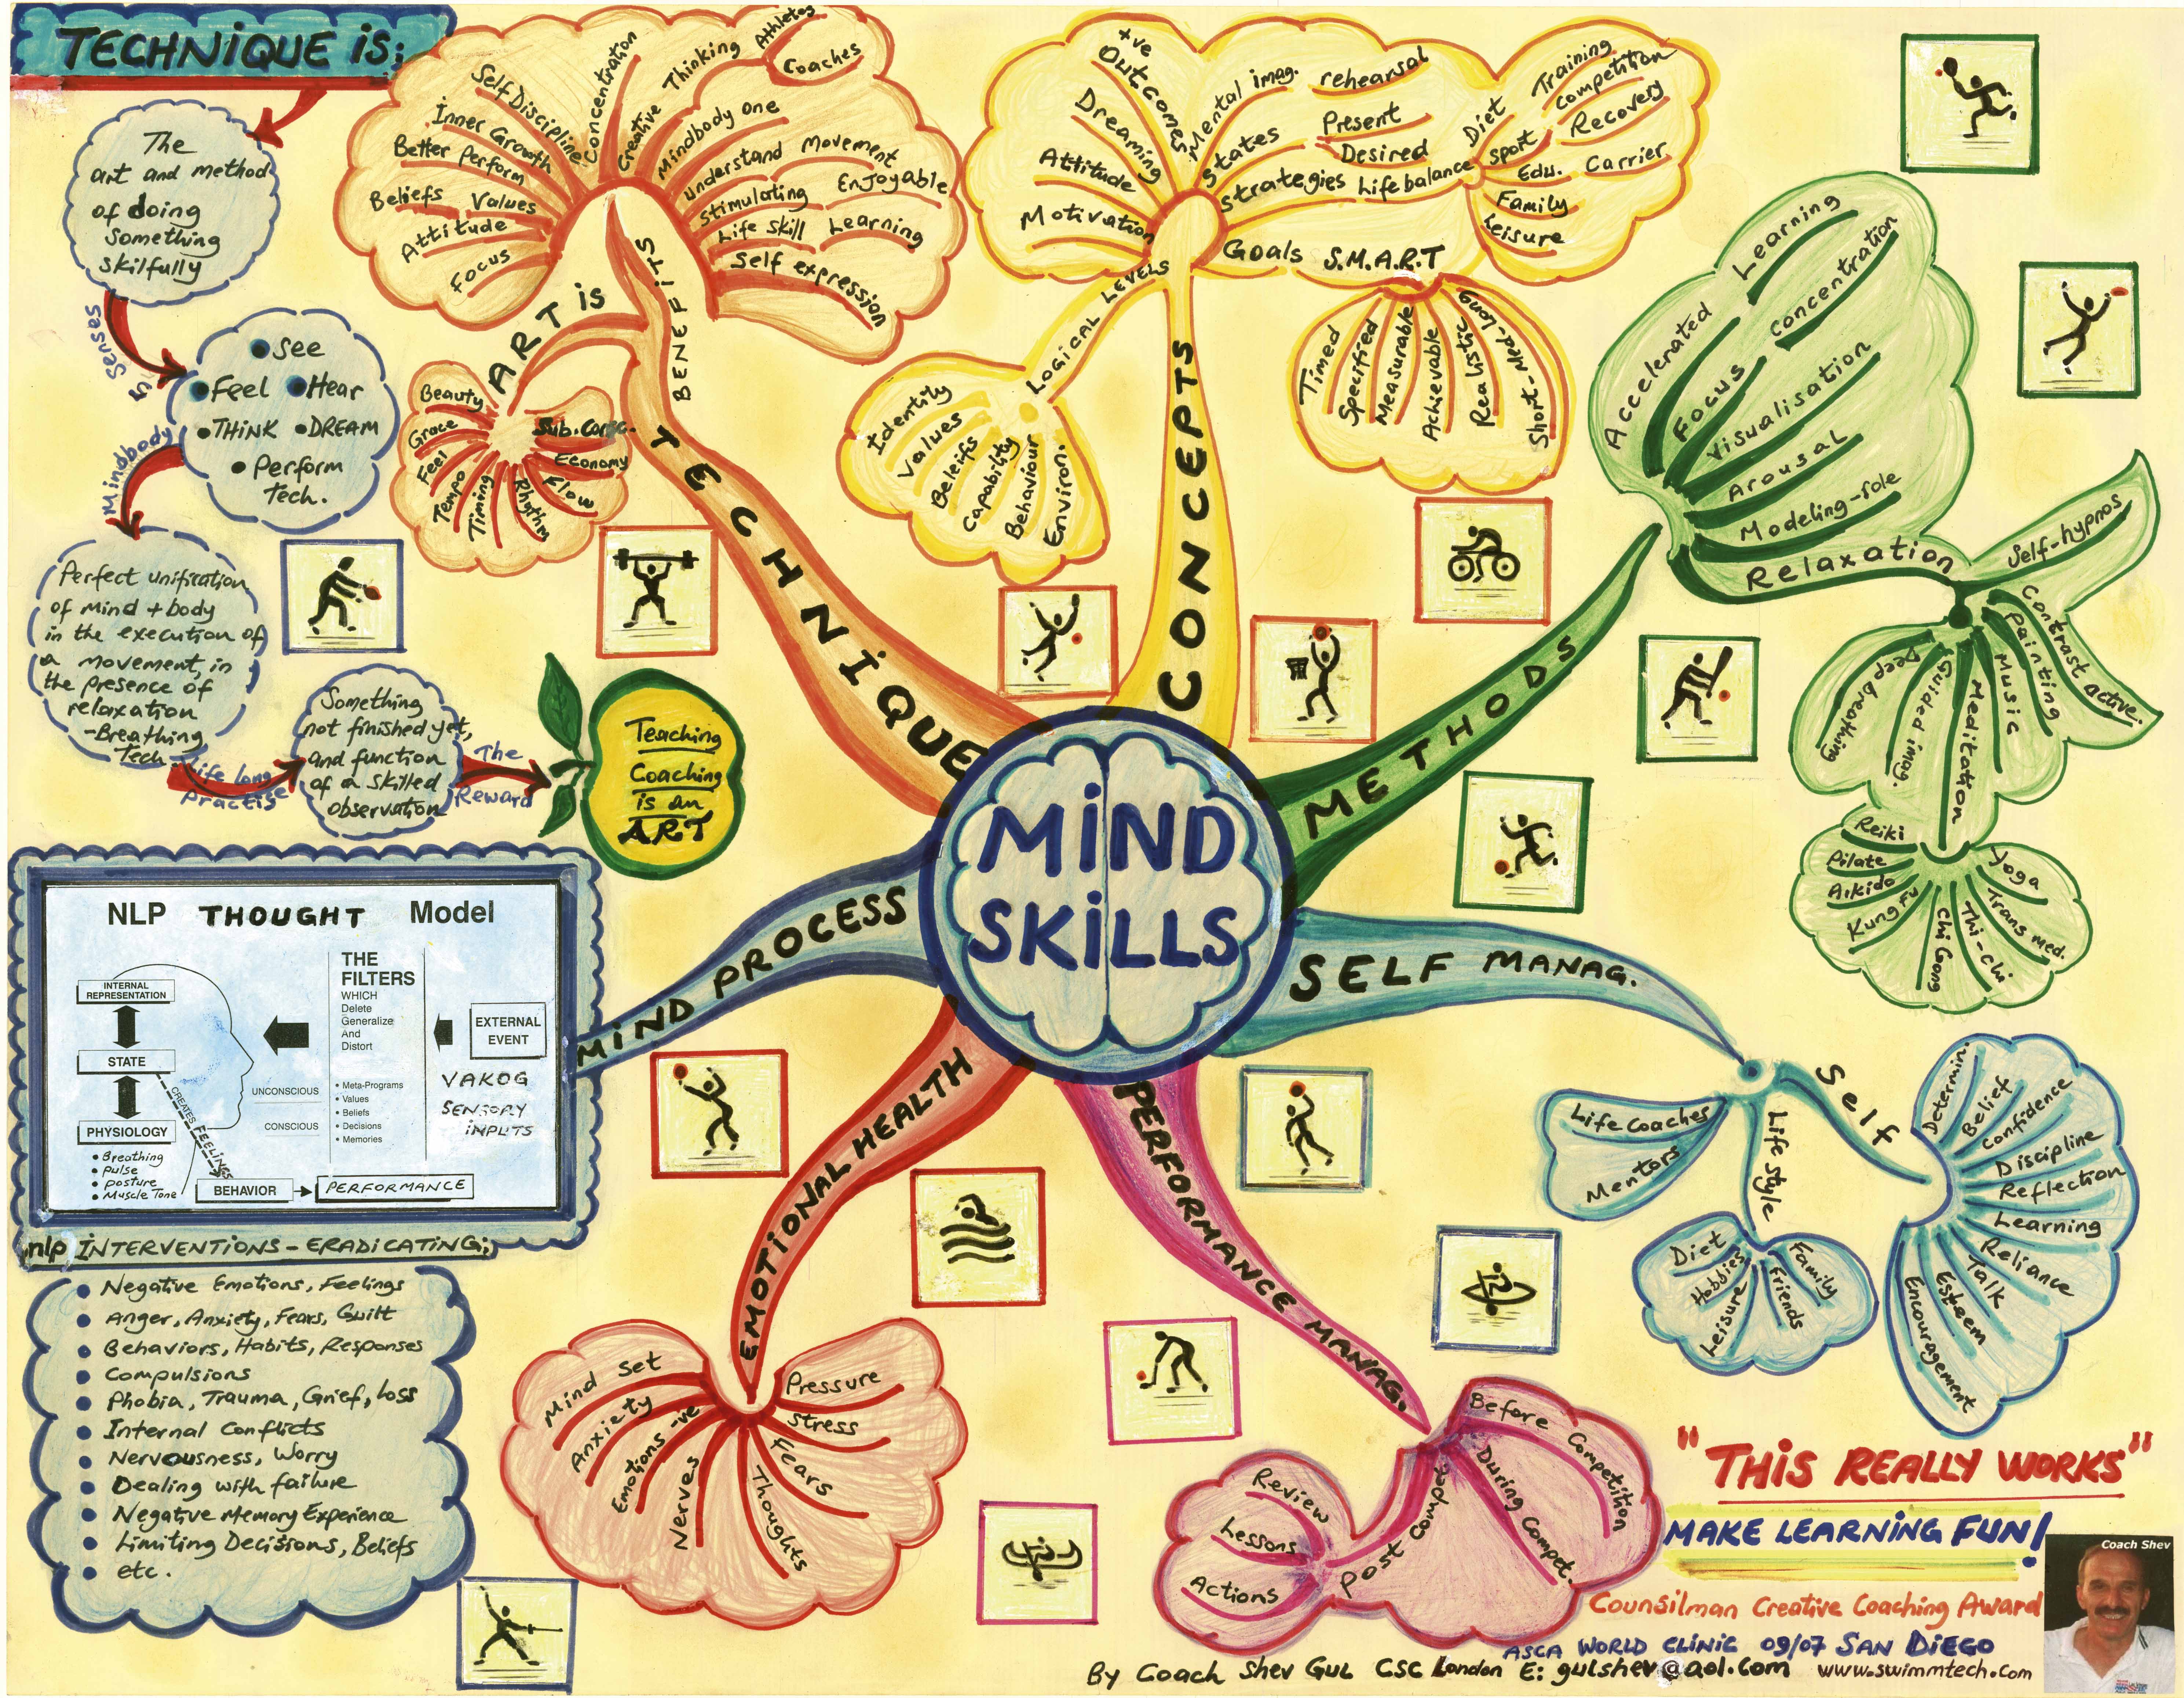 mind map is just a flowchart. Or a flowchart is just a mind map. Or 